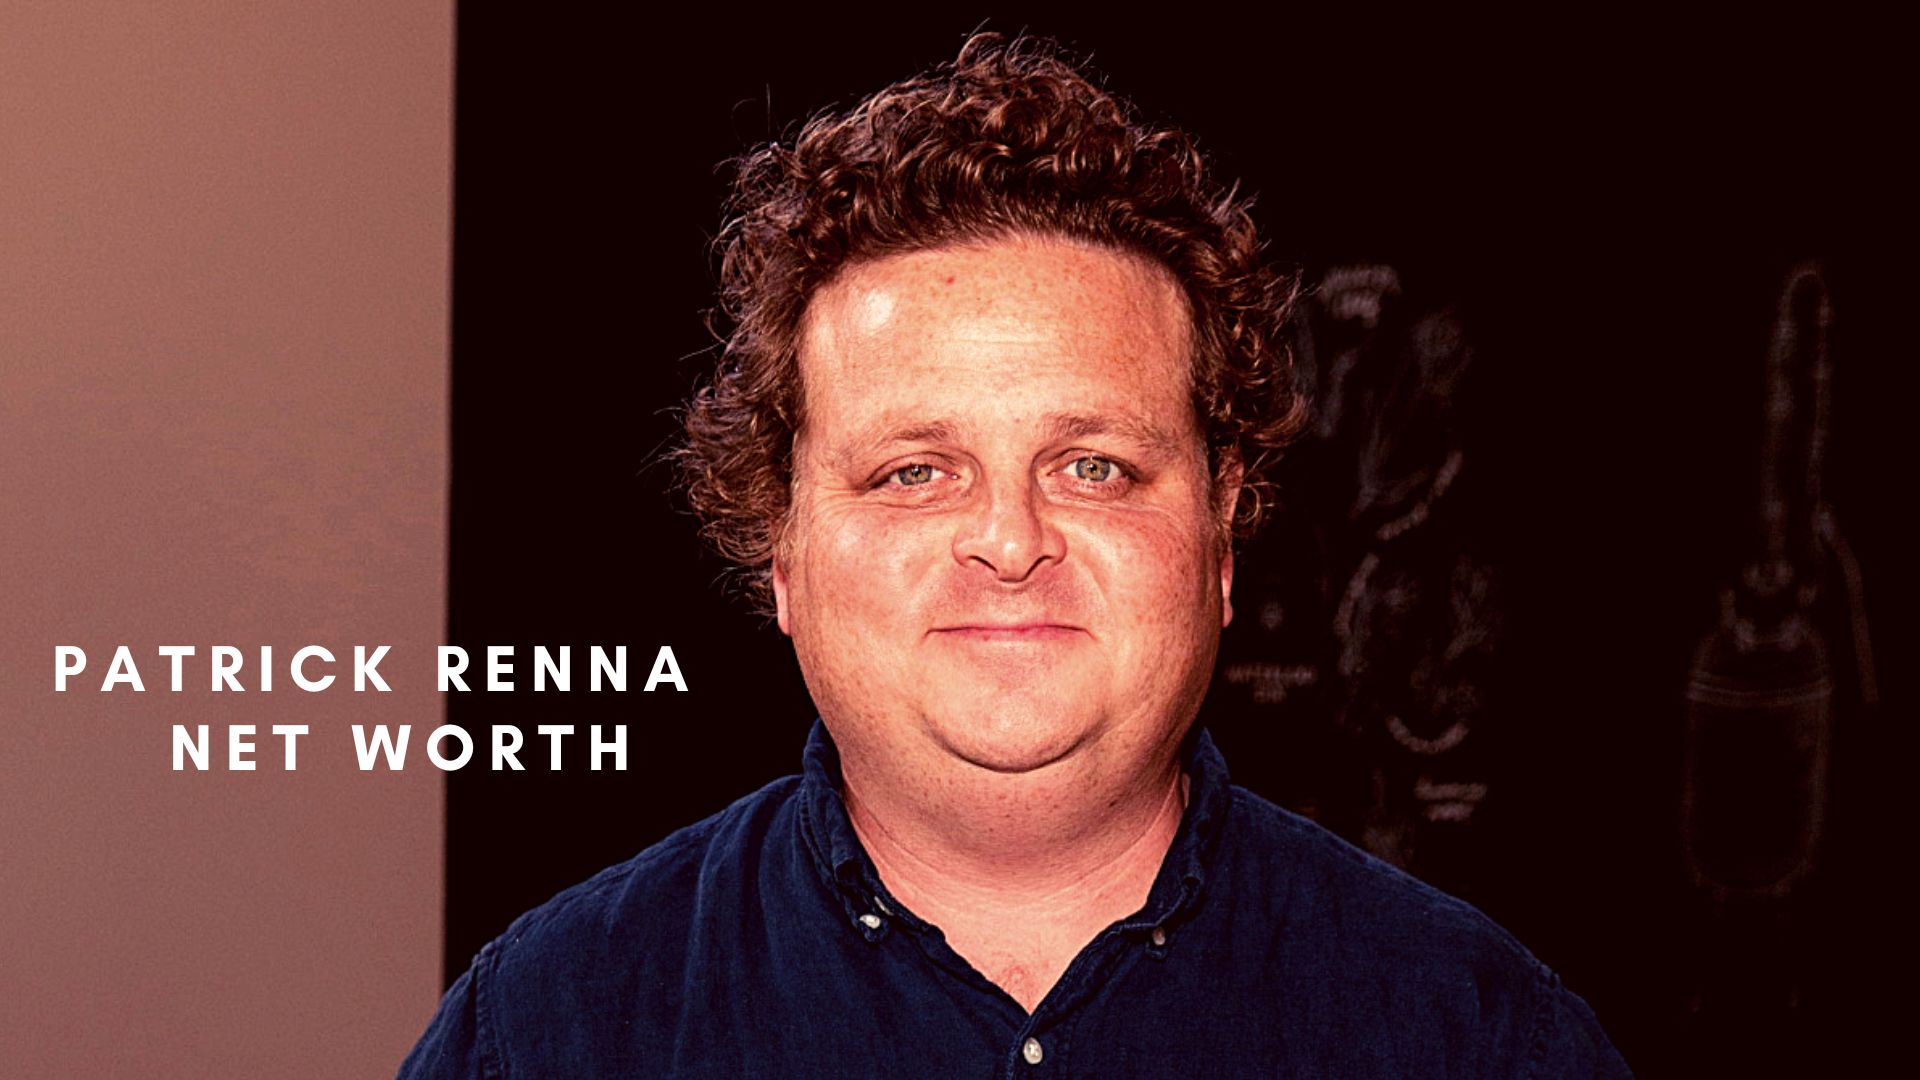 Patrick Renna 2022 Net Worth, Salary, Records, and Personal Life